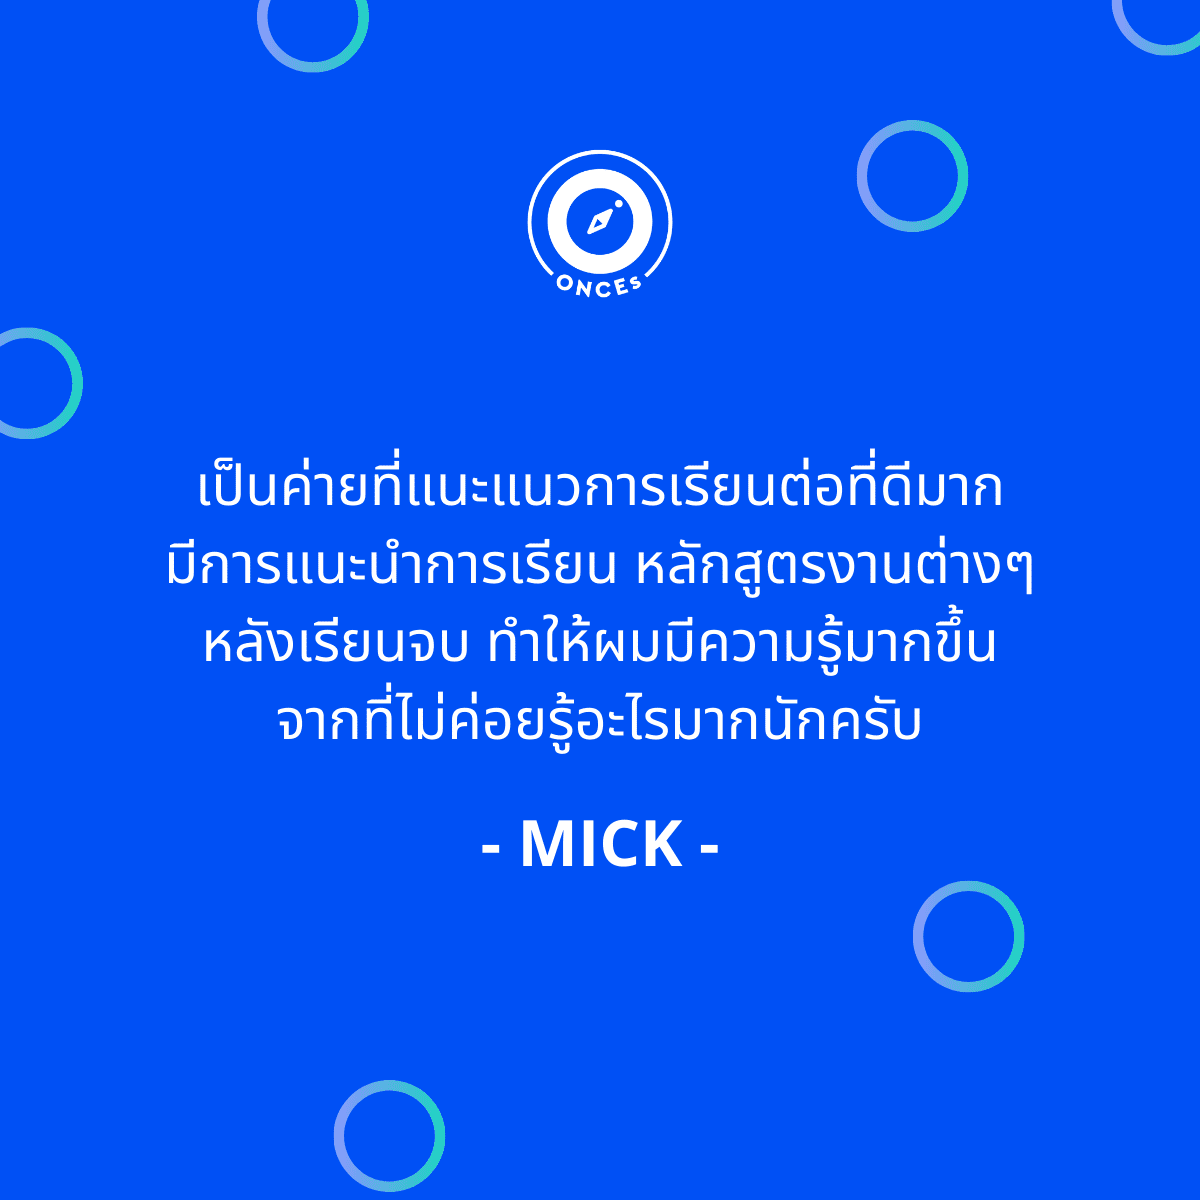 Review-ONCEs Thailand (3)